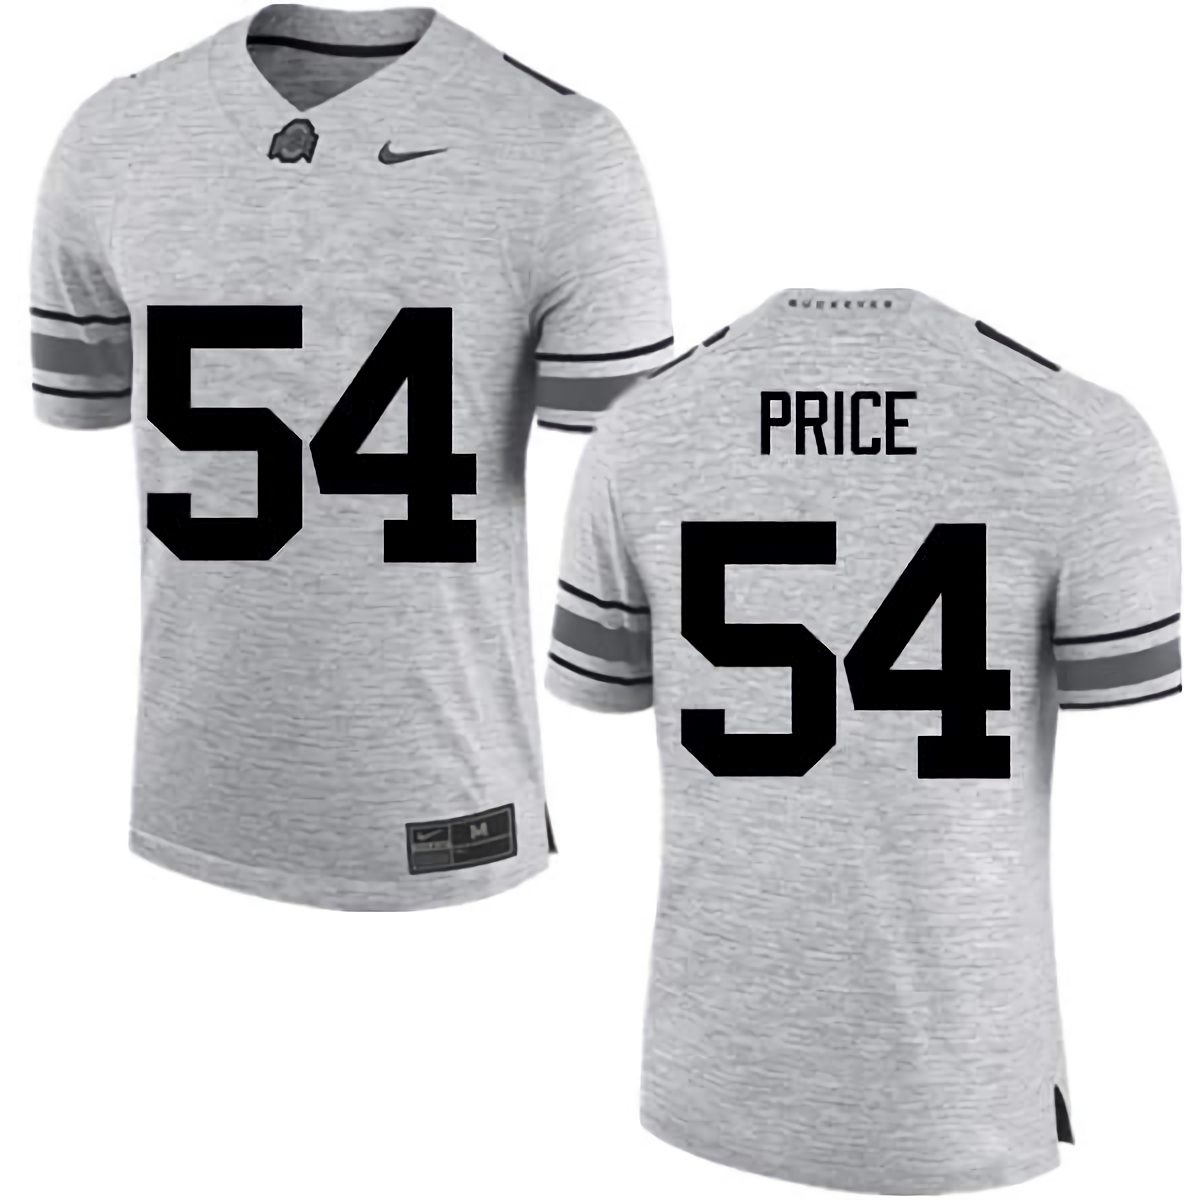 Billy Price Ohio State Buckeyes Men's NCAA #54 Nike Gray College Stitched Football Jersey EOB6056XP